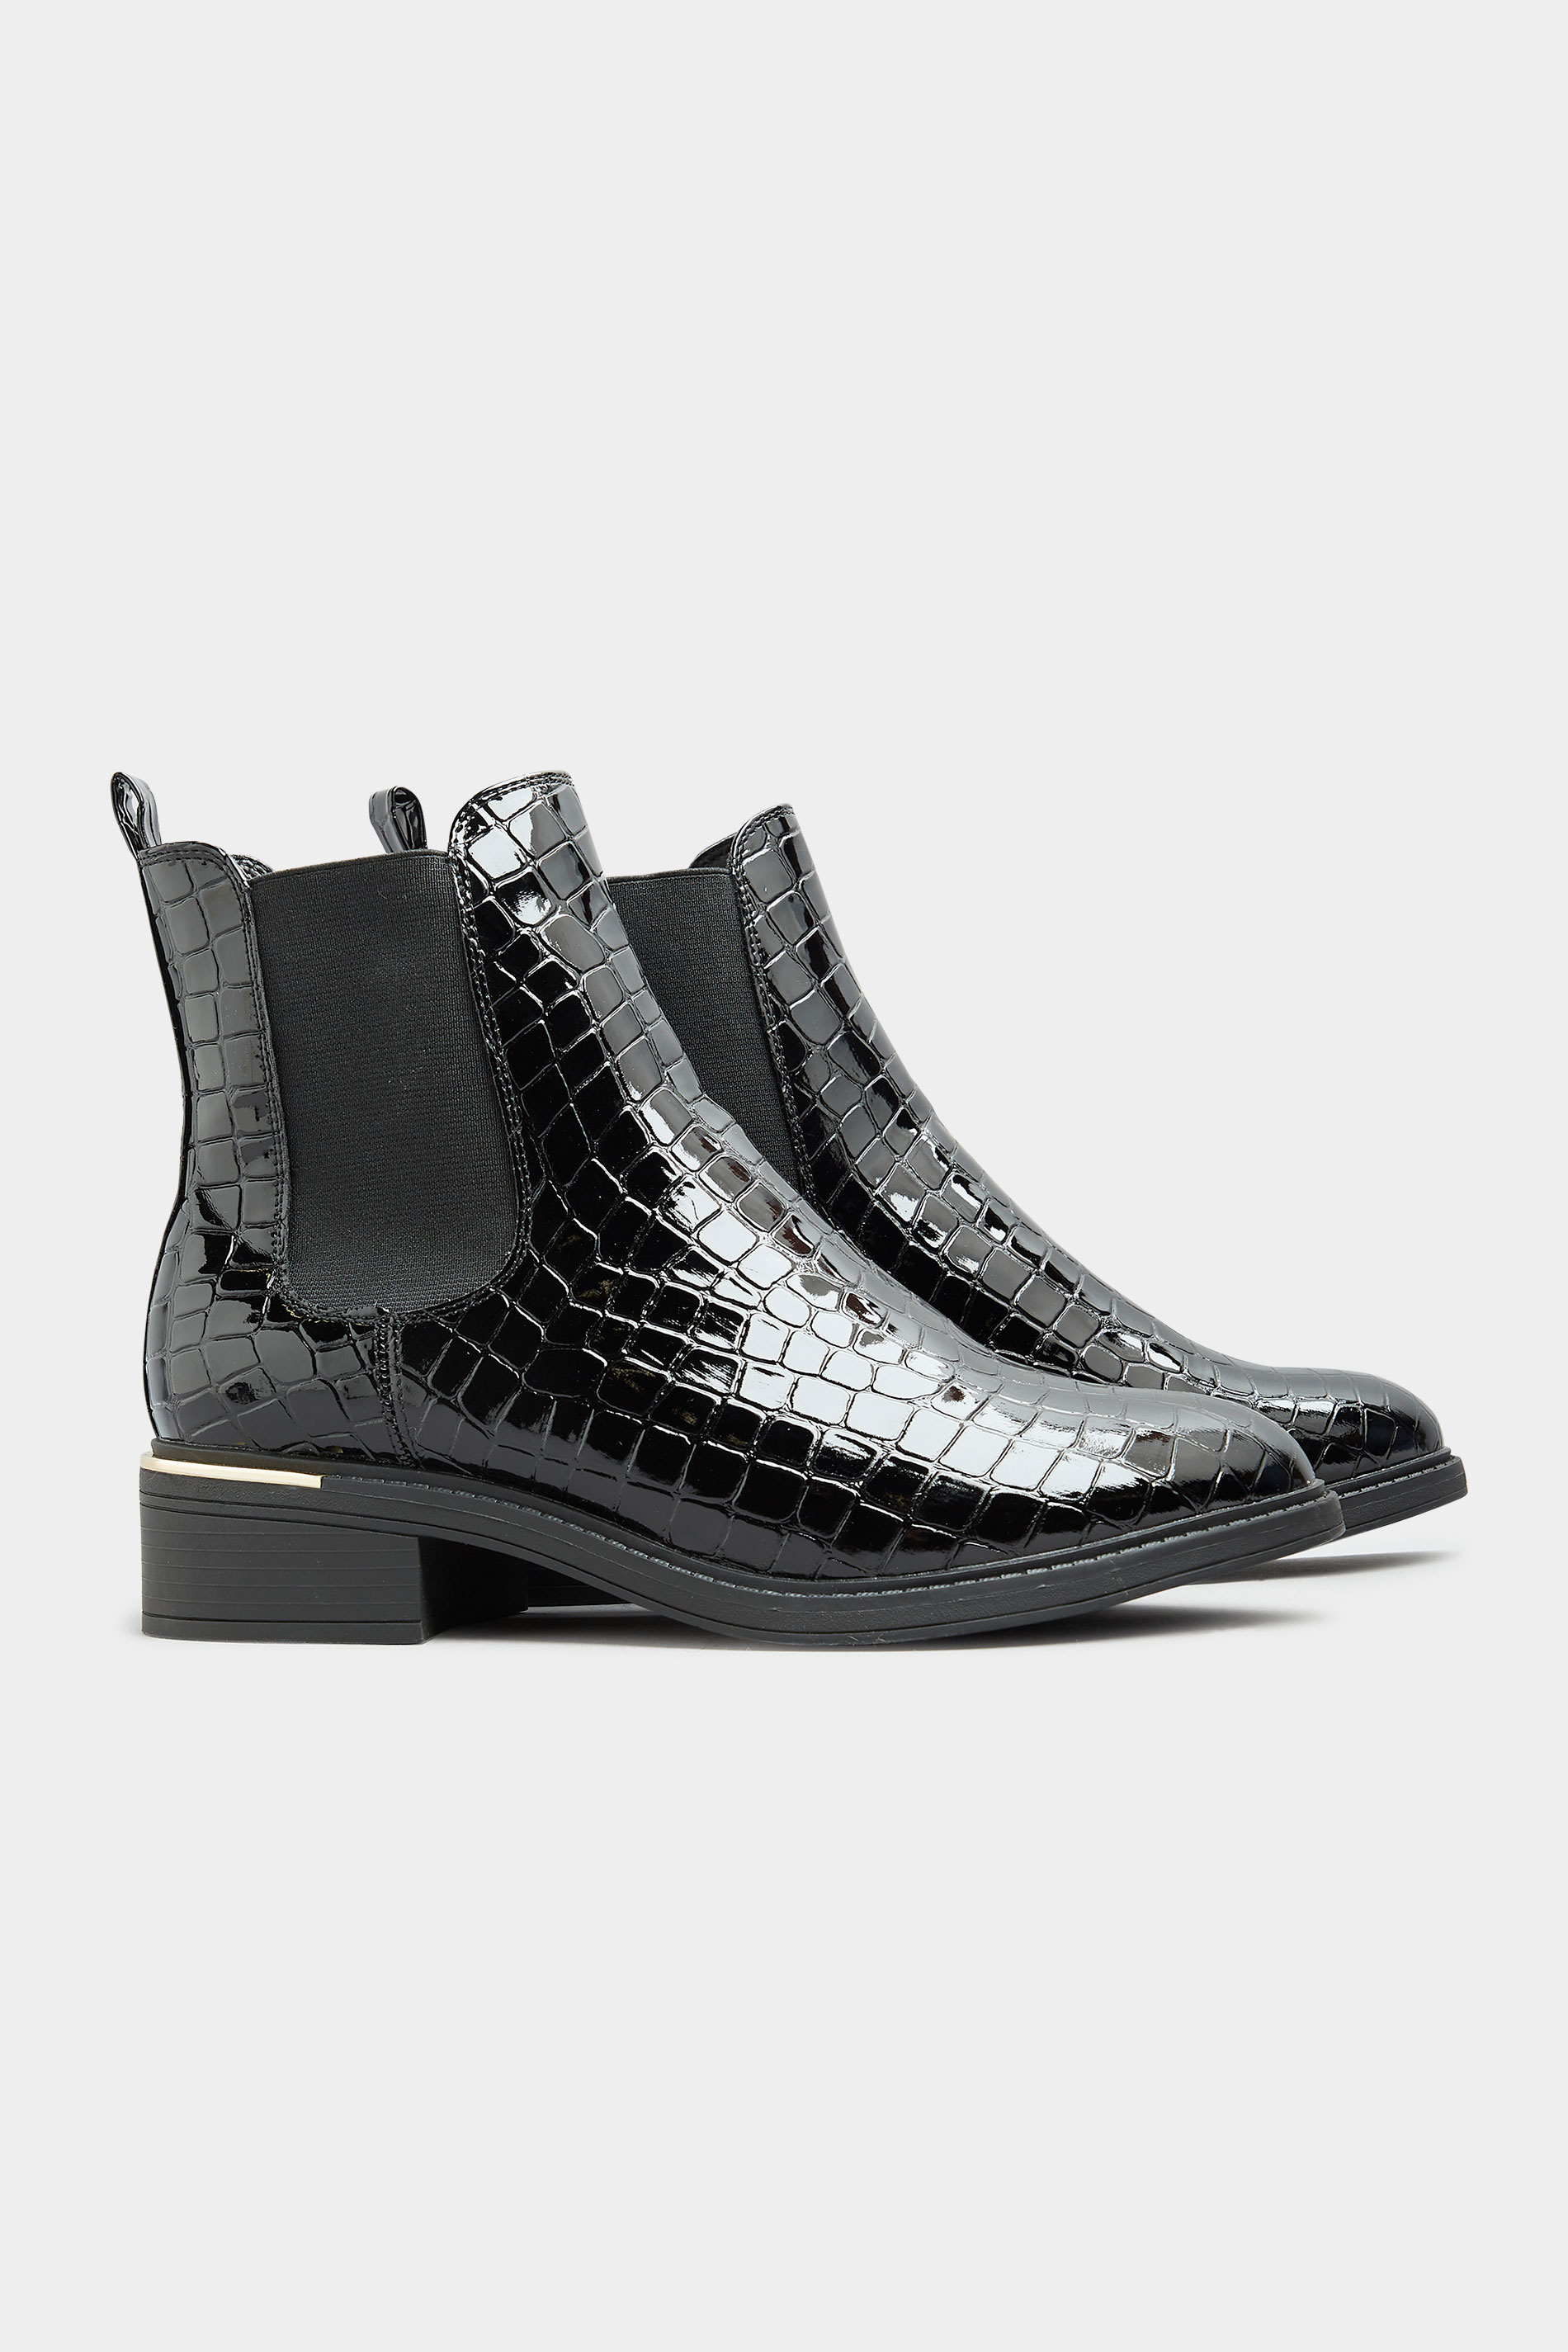 LIMITED COLLECTION Black Leather Look Heeled Chelsea Boots In Wide Fit_C.jpg